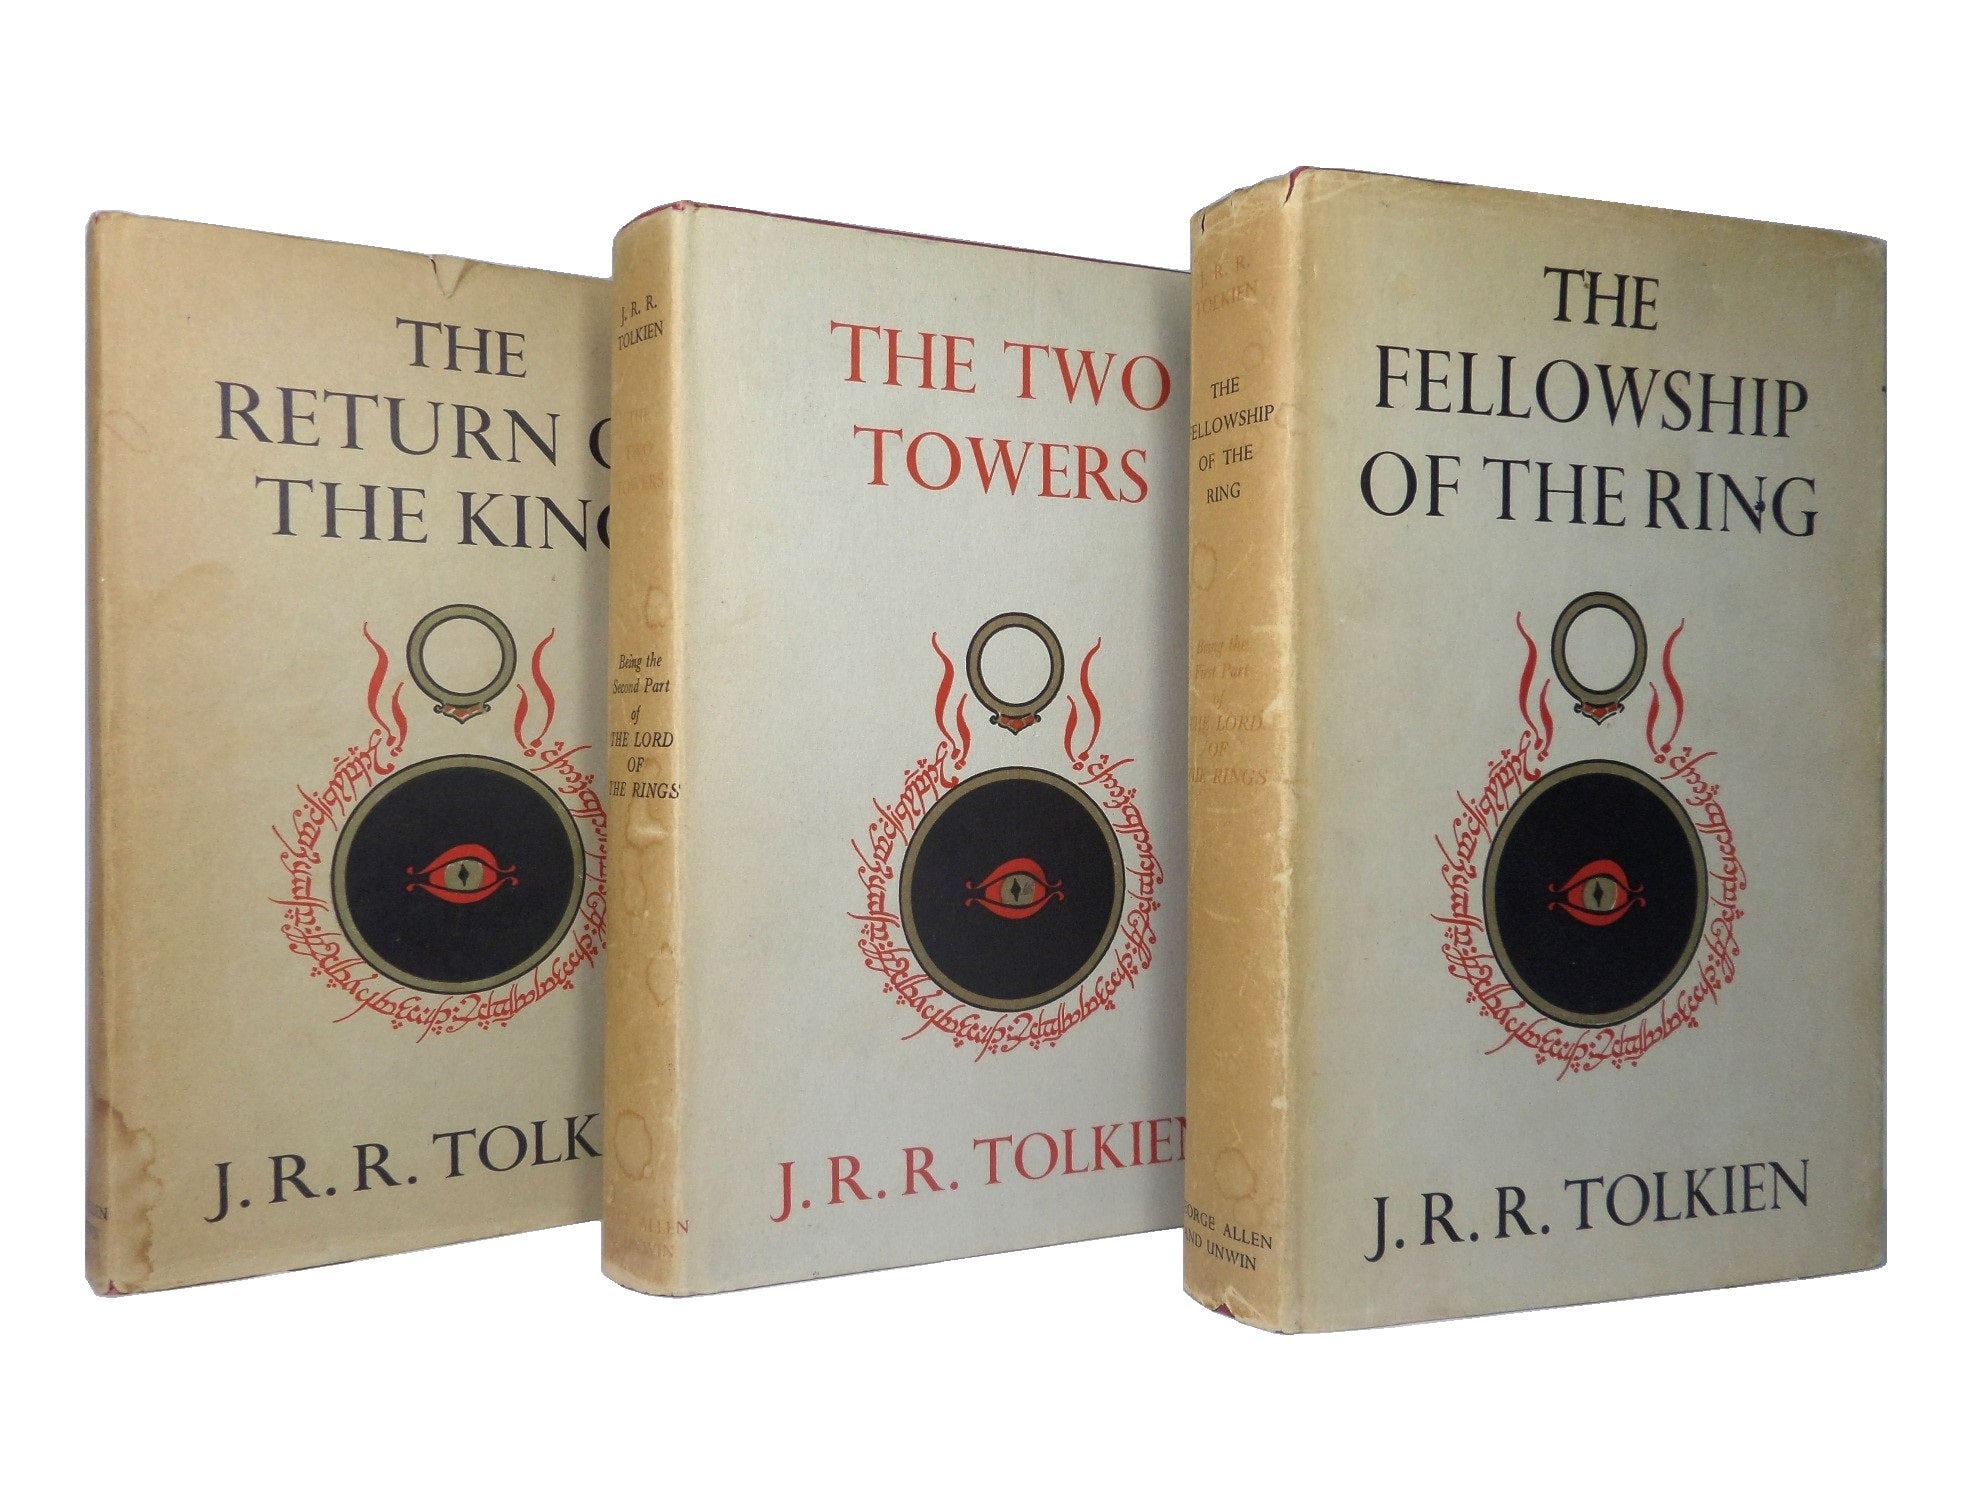 THE LORD OF THE RINGS BY J.R.R. TOLKIEN 1965-1966 FIRST EDITION SET, 15TH, 11TH, 11TH IMPRESSIONS